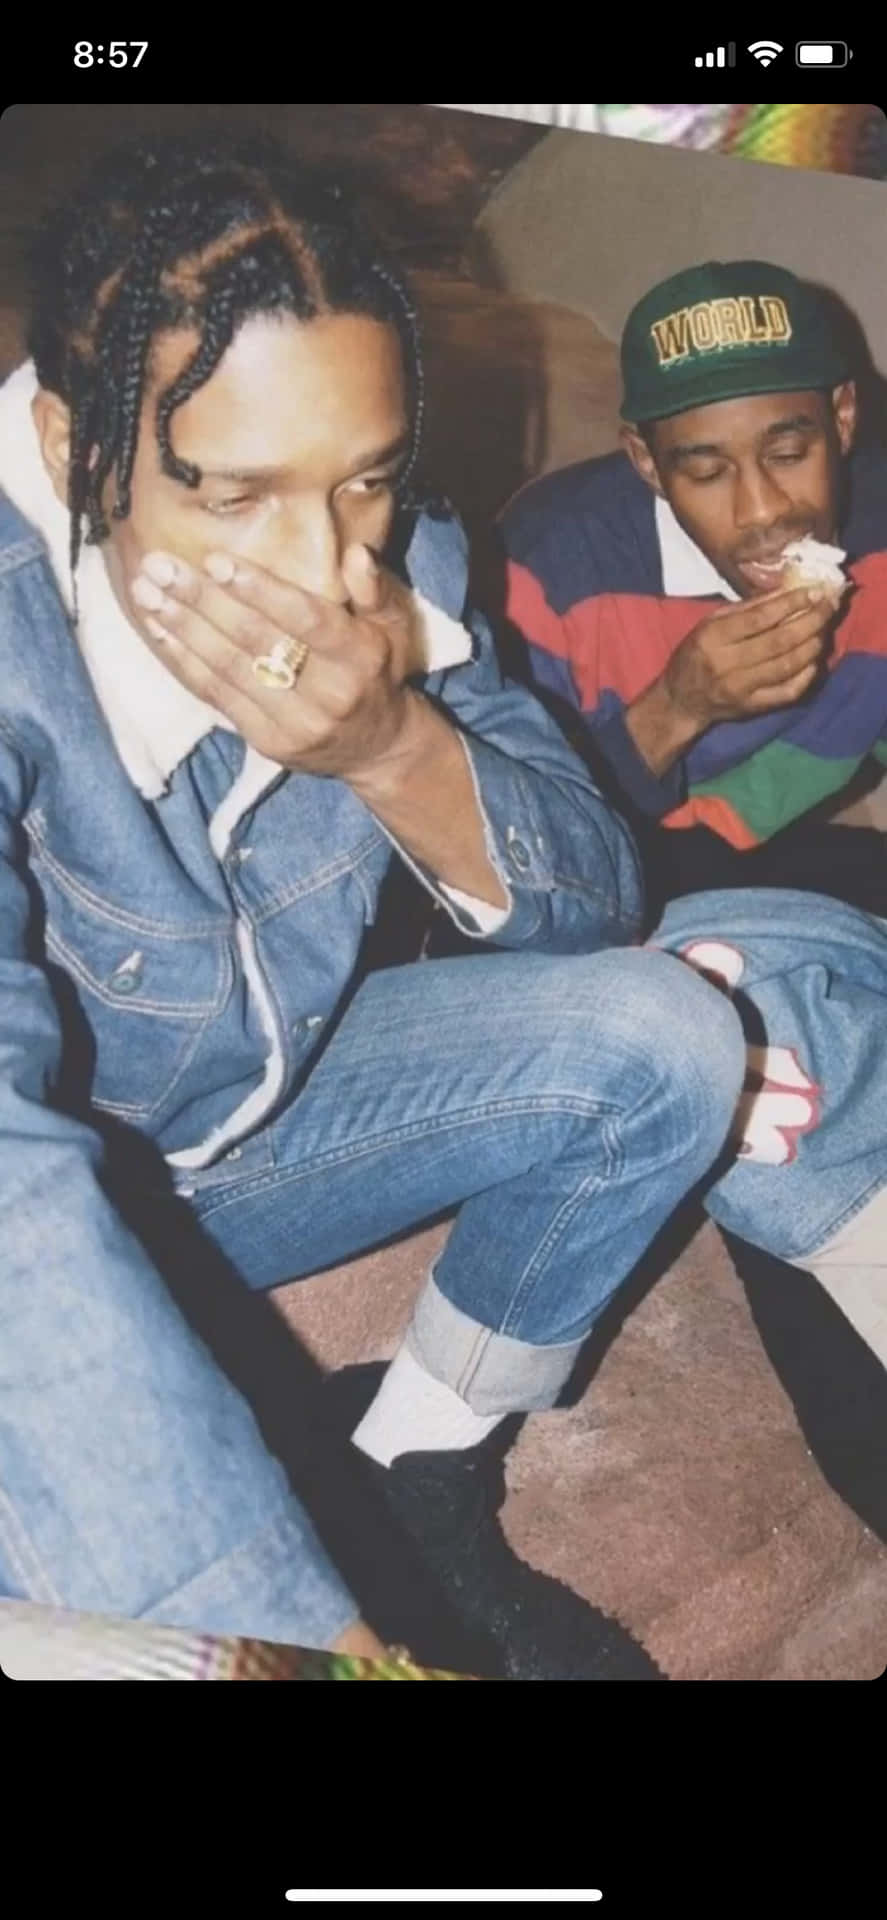 Rap stars ASAP Rocky and Tyler, The Creator make a dynamic duo Wallpaper